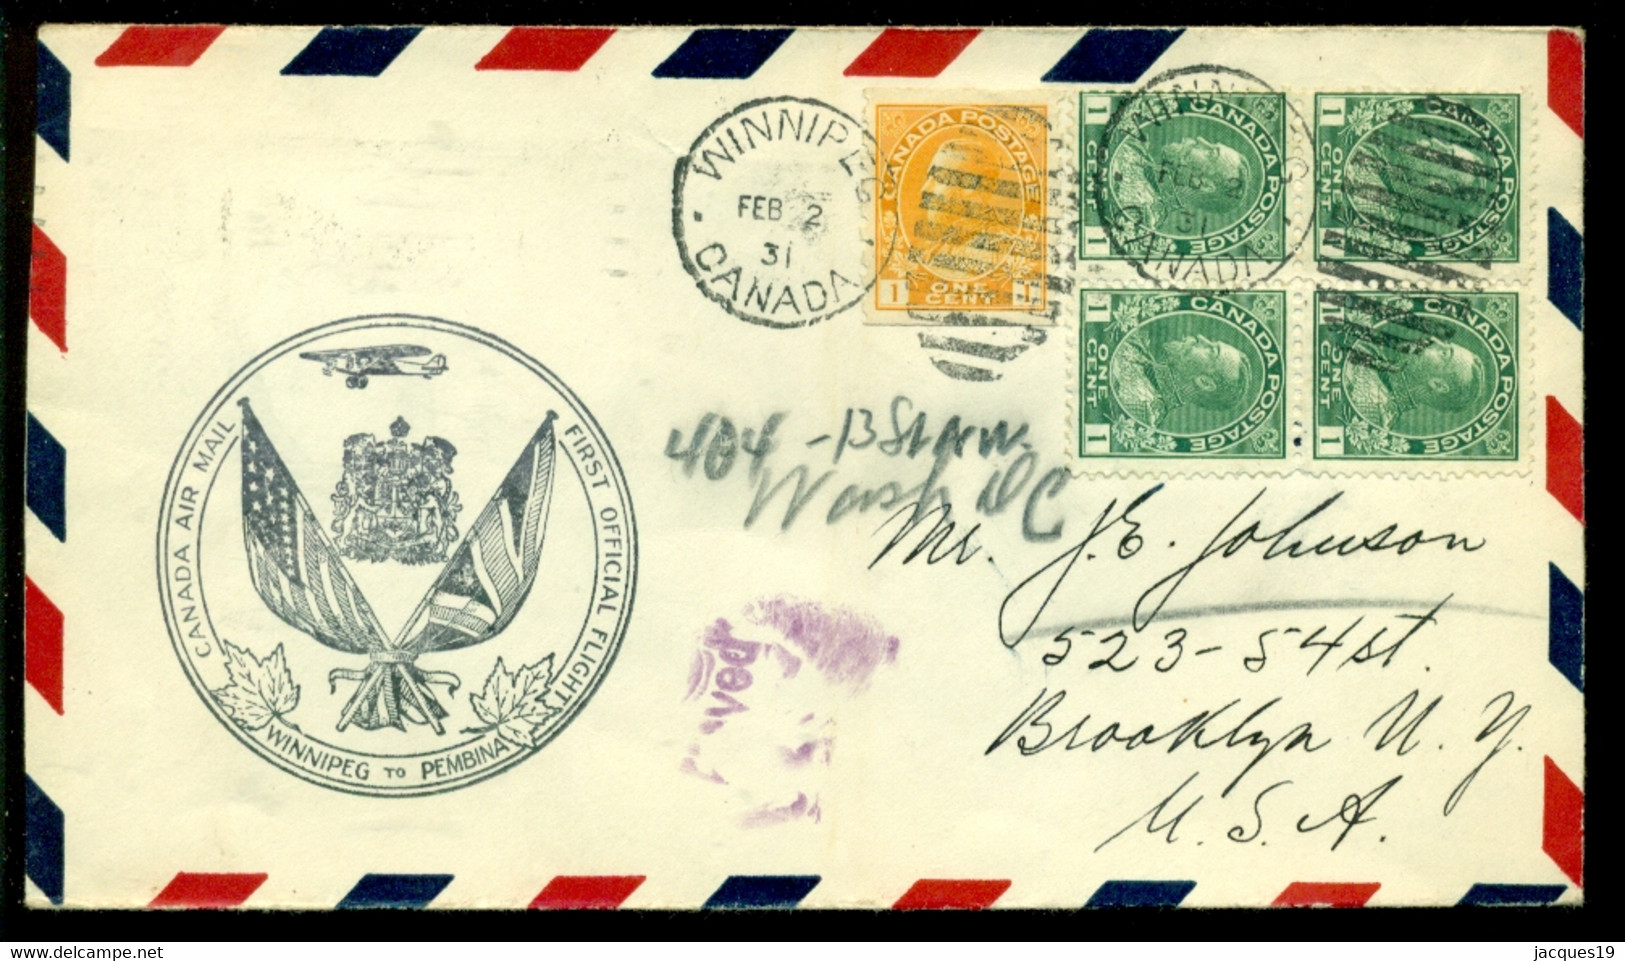 Canada 1931 Air Cover First Flight Winnipeg-Pembina Special Cancels On Front And Back Scott # 104 (4) And 126 Die II - Primi Voli